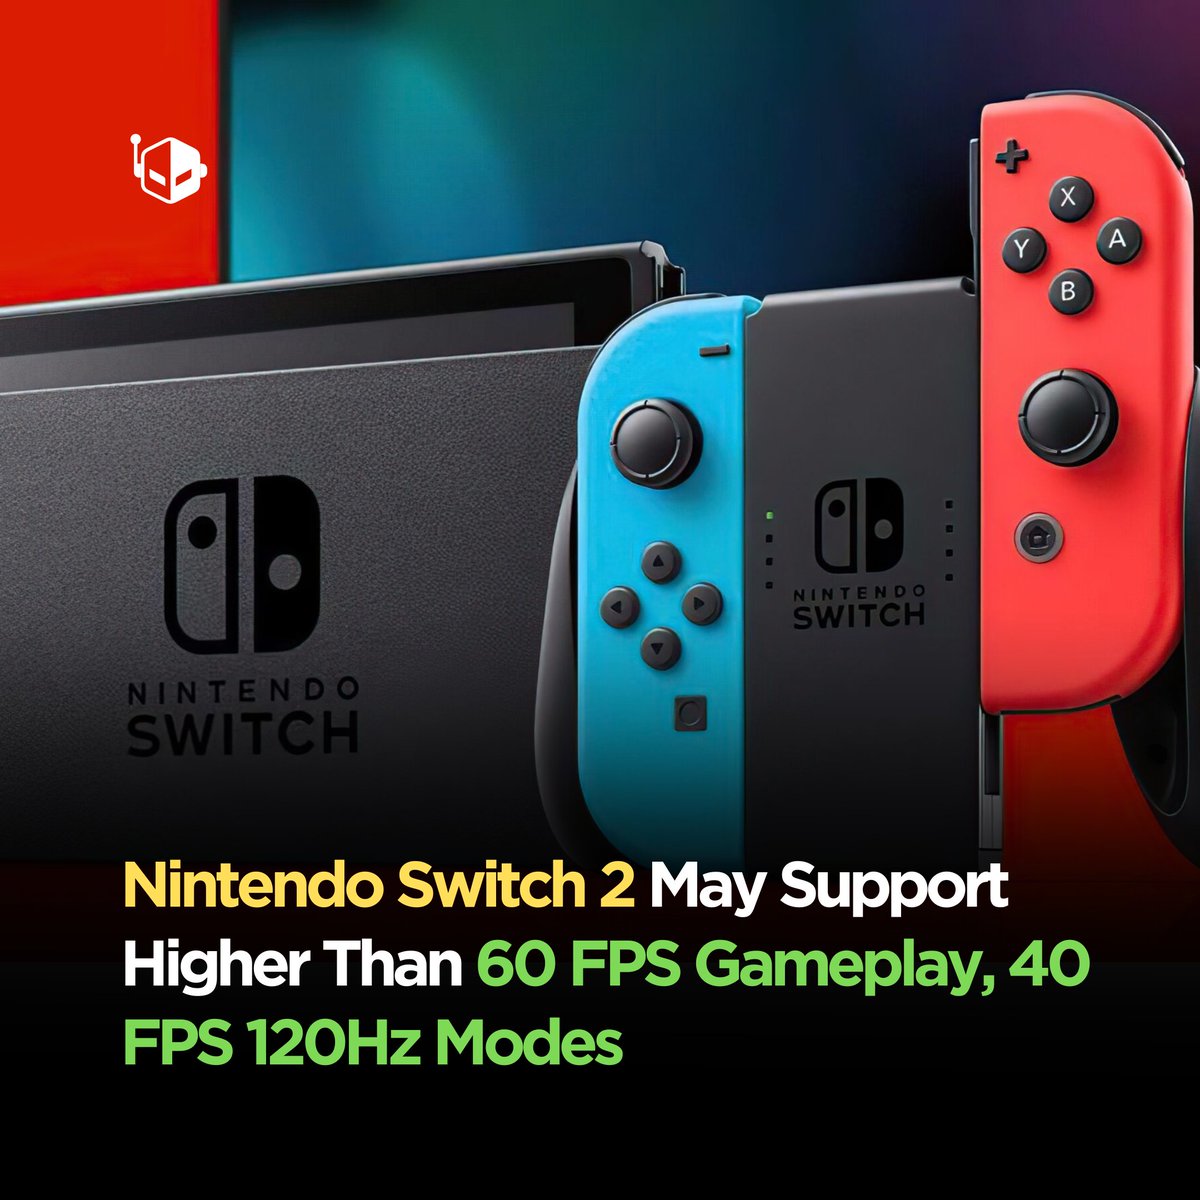 The Nintendo Switch 2 may support higher than 60 frames per second gameplay and even 40 FPS, 120Hz modes. wccftech.com/nintendo-switc…